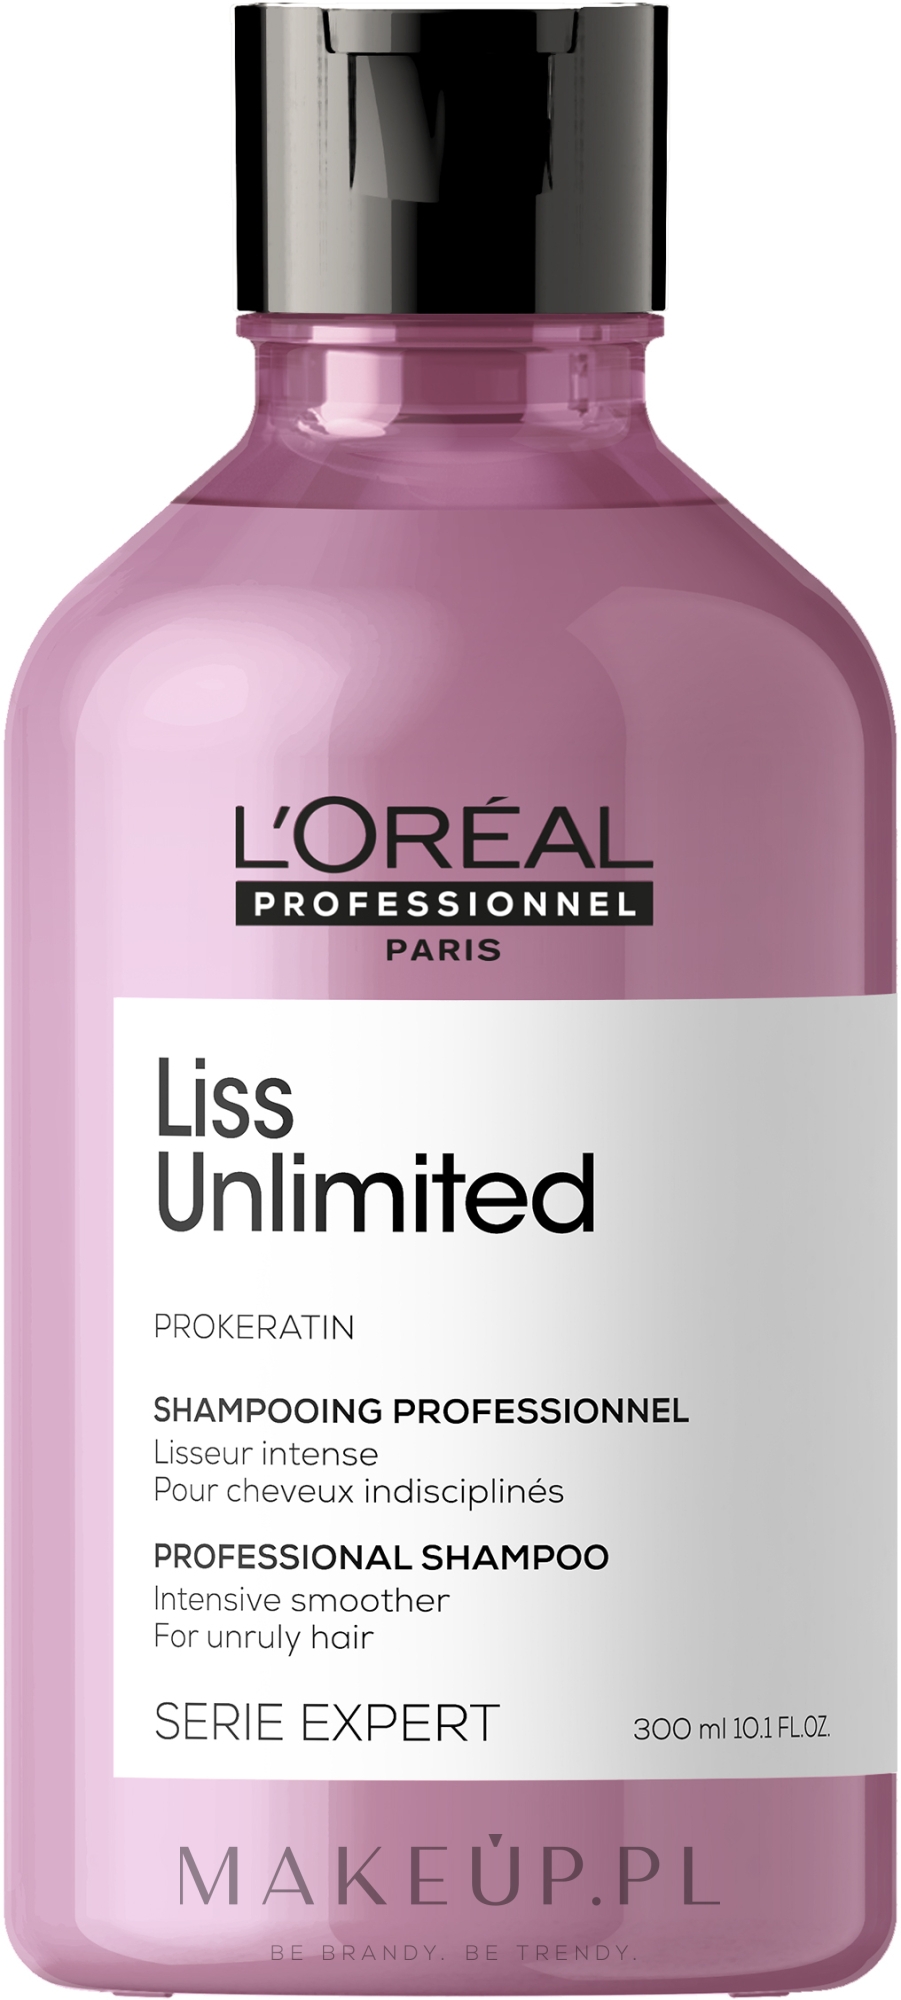 szampon loreal liss unlimited opinie